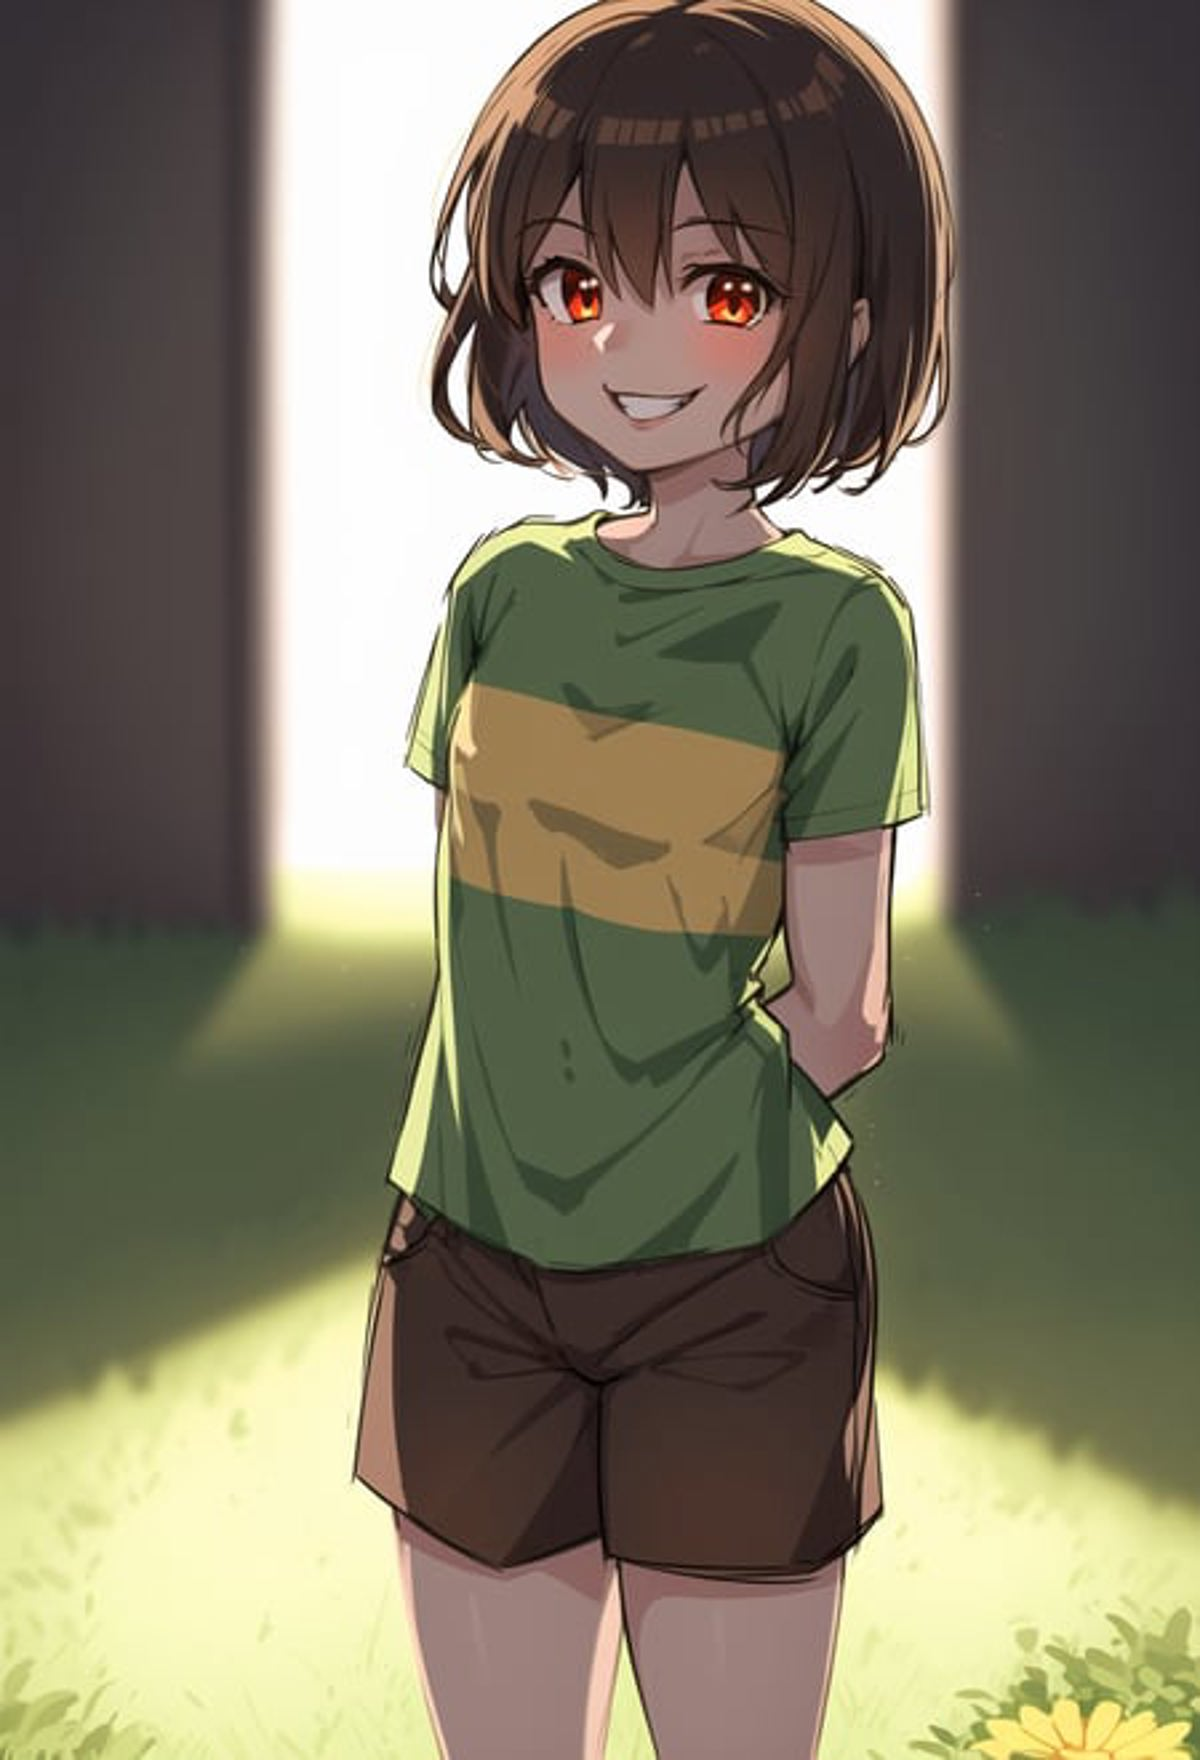 Image of chara from undertale